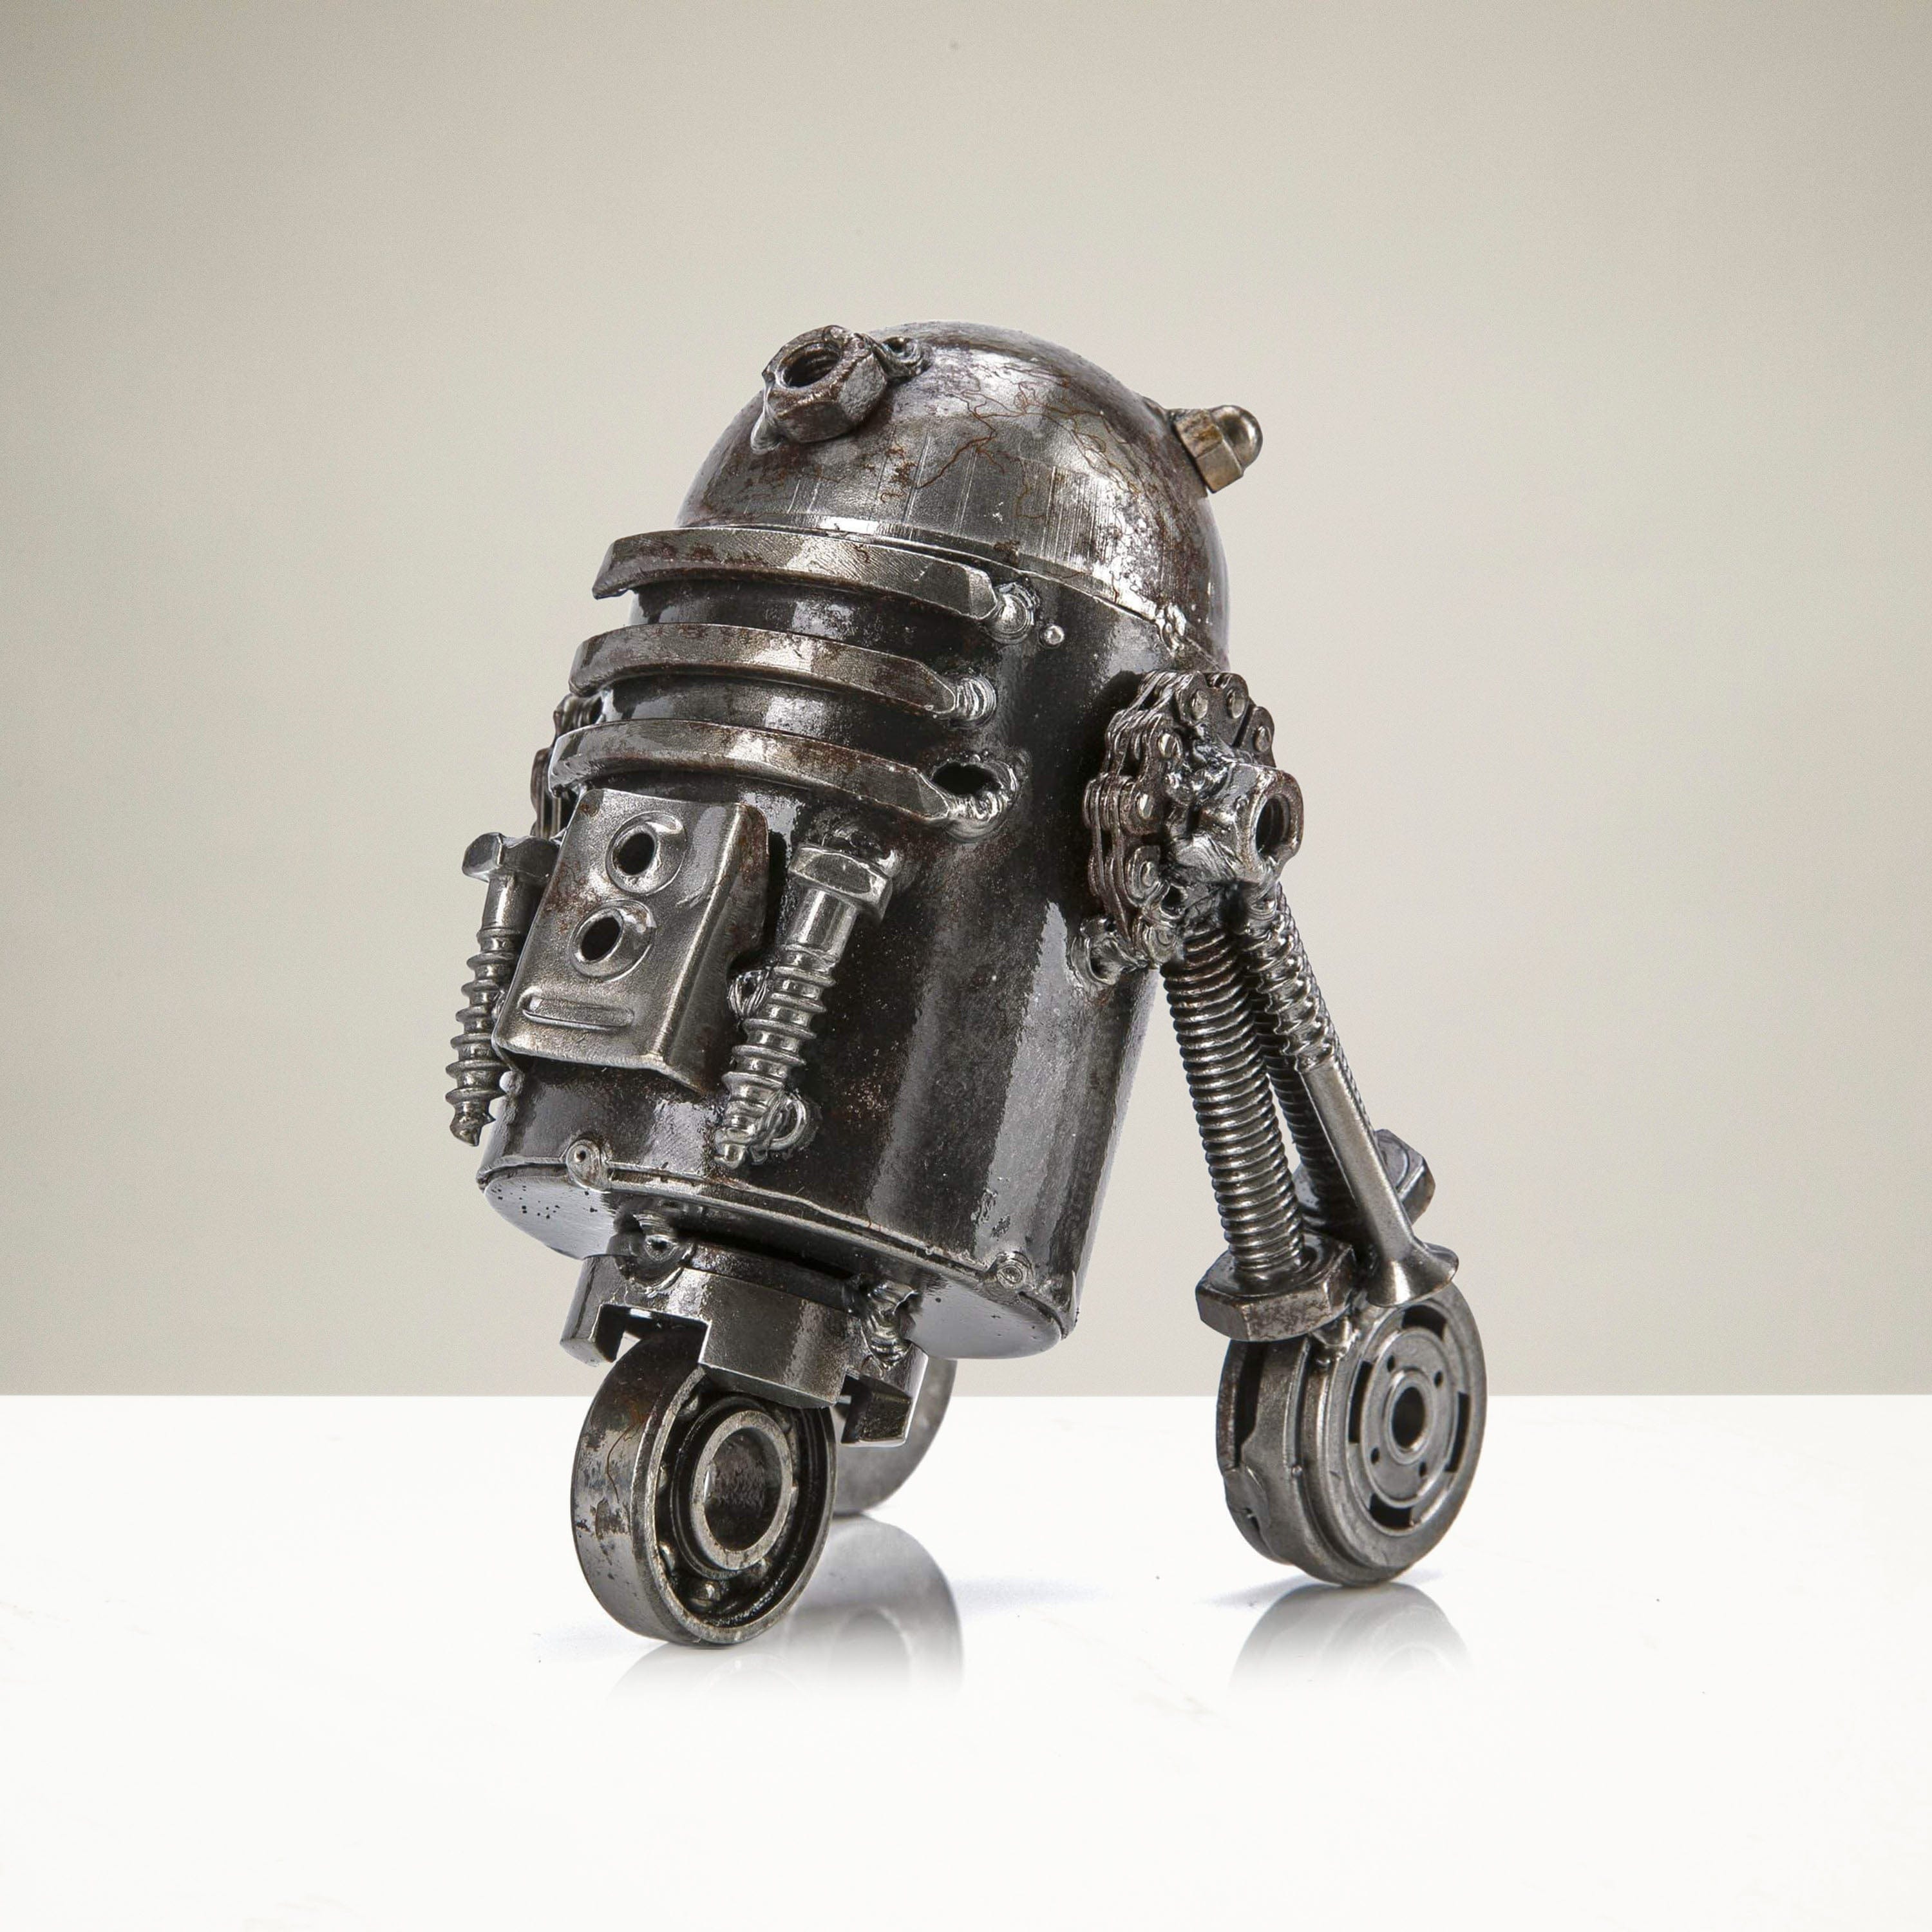 Kalifano Recycled Metal Art R2D2 Inspired Recycled Metal Sculpture RMS-250R2-N